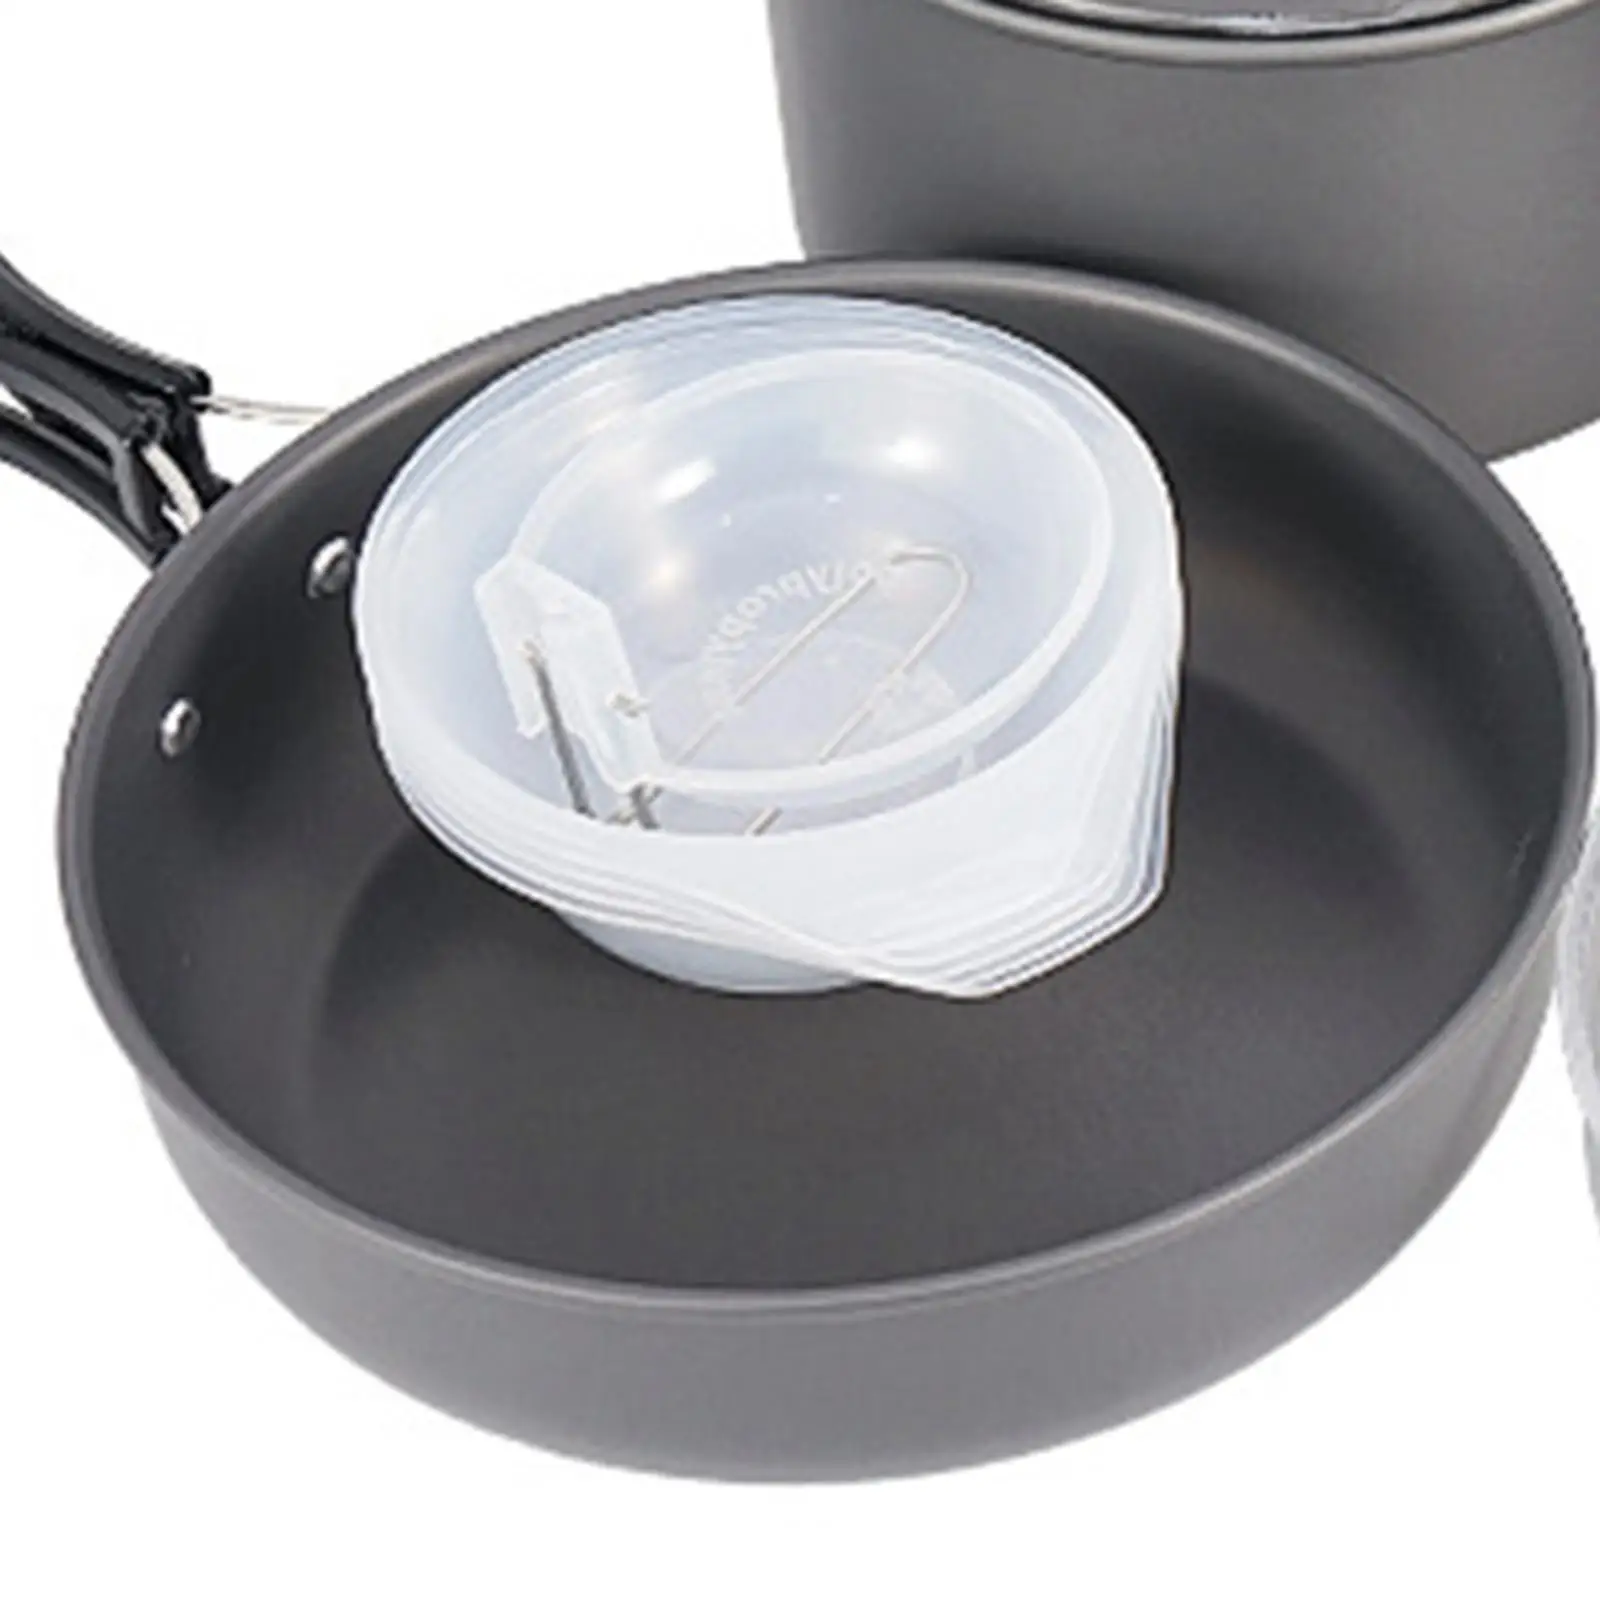 Camping Cookware Mess Kit Nonstick Aluminum Alloy Teapot Cooking Utensils Set for BBQ Outdoor Cooking Family Travel Backpacking